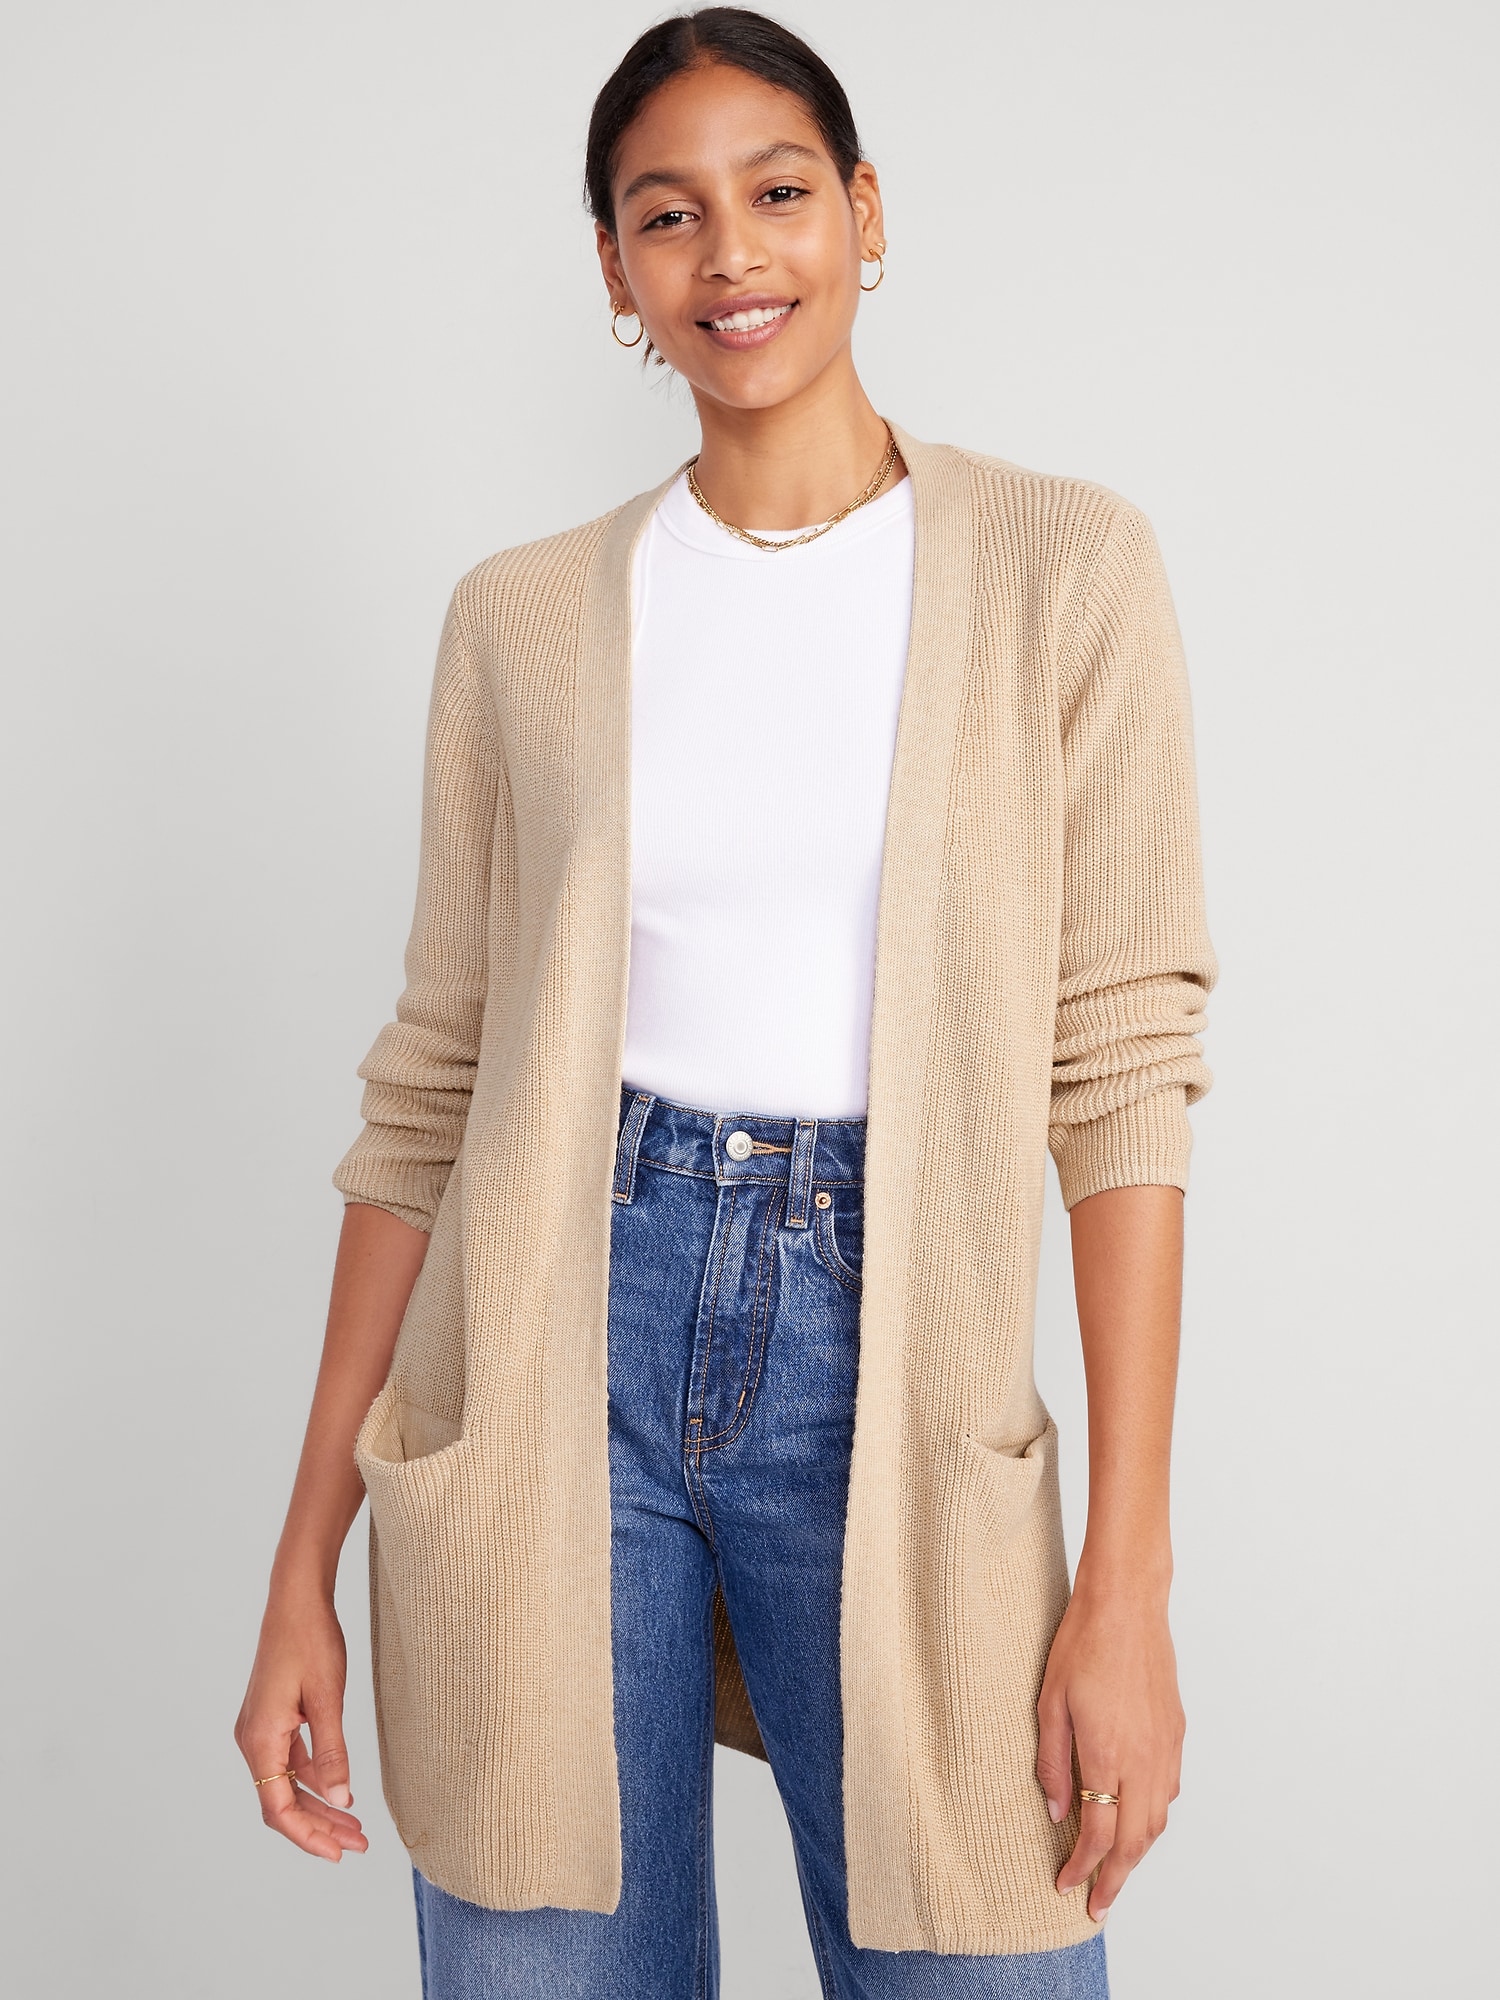 Textured Open-Front Sweater Hot Deal